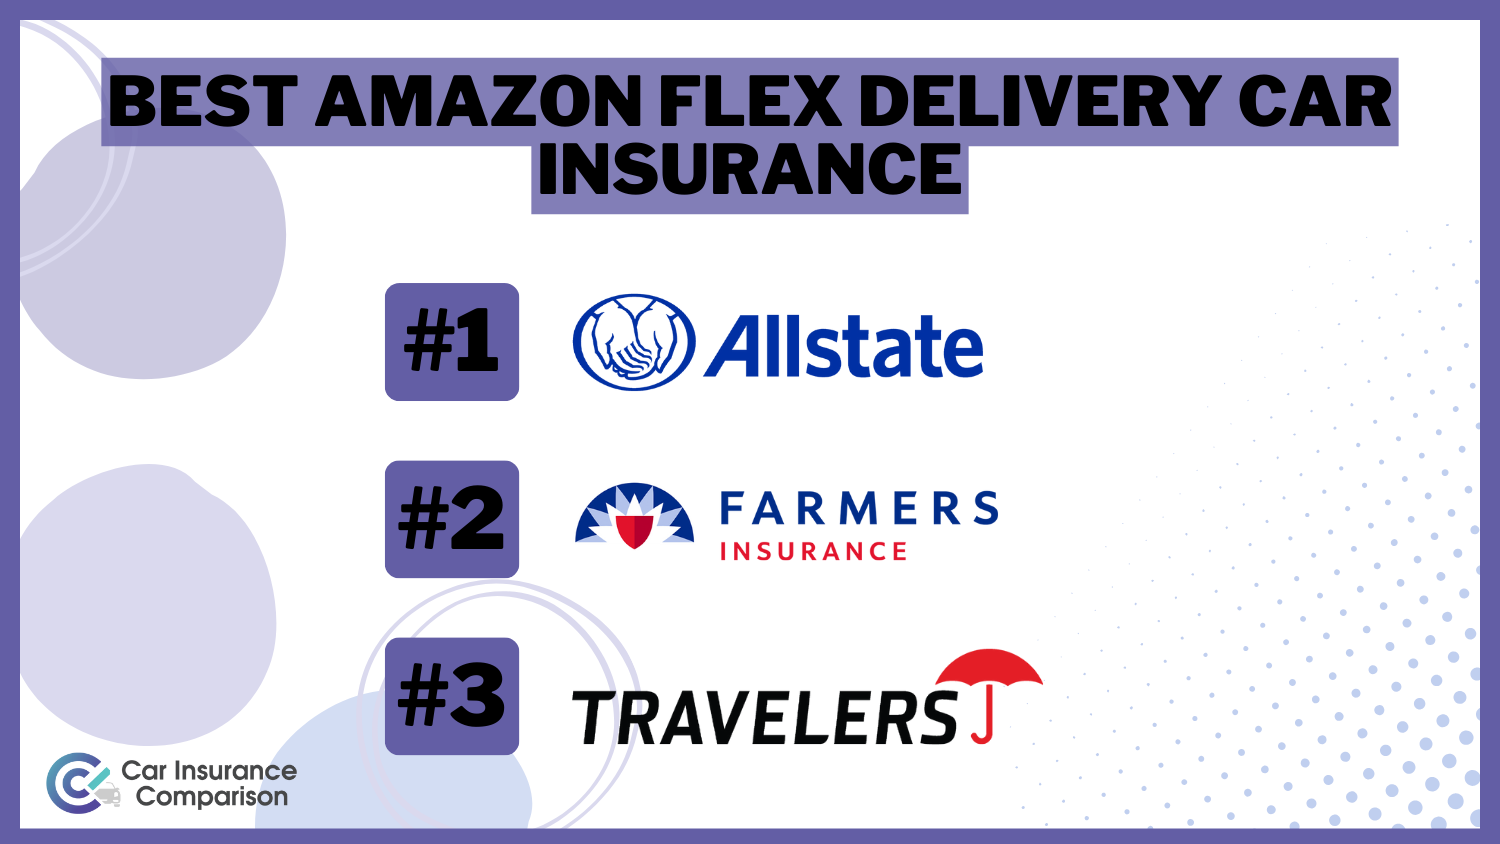 Best Amazon Flex Delivery Car Insurance: Allstate, Farmers, and Travelers